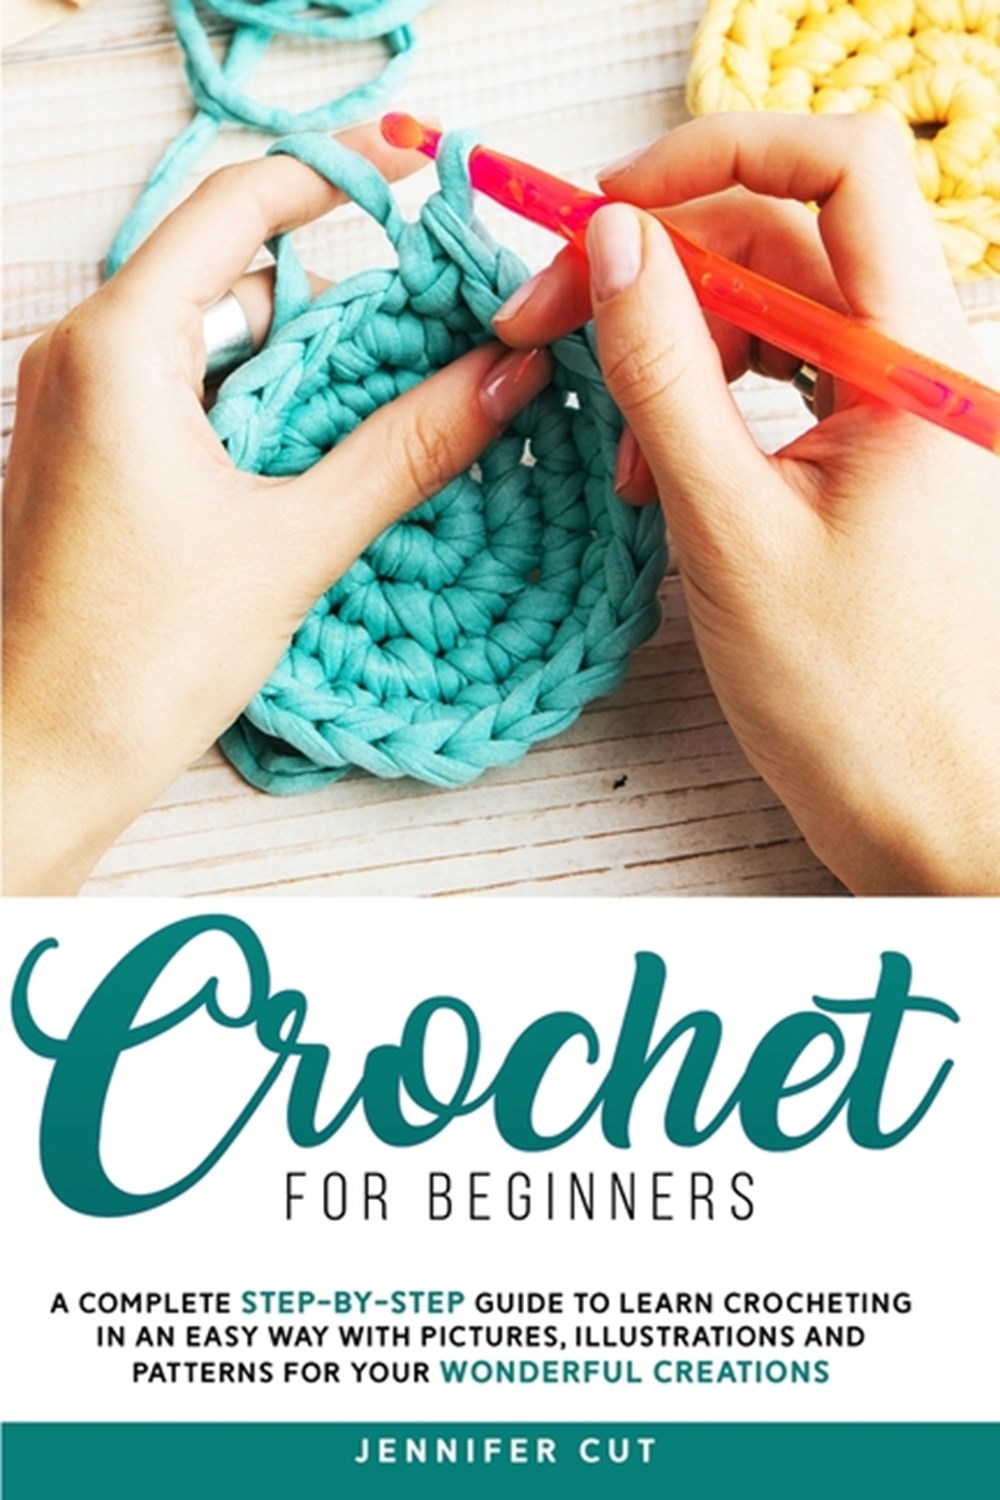 Buy Crochet for Beginners: A Complete Step-By-Step Guide To Learn